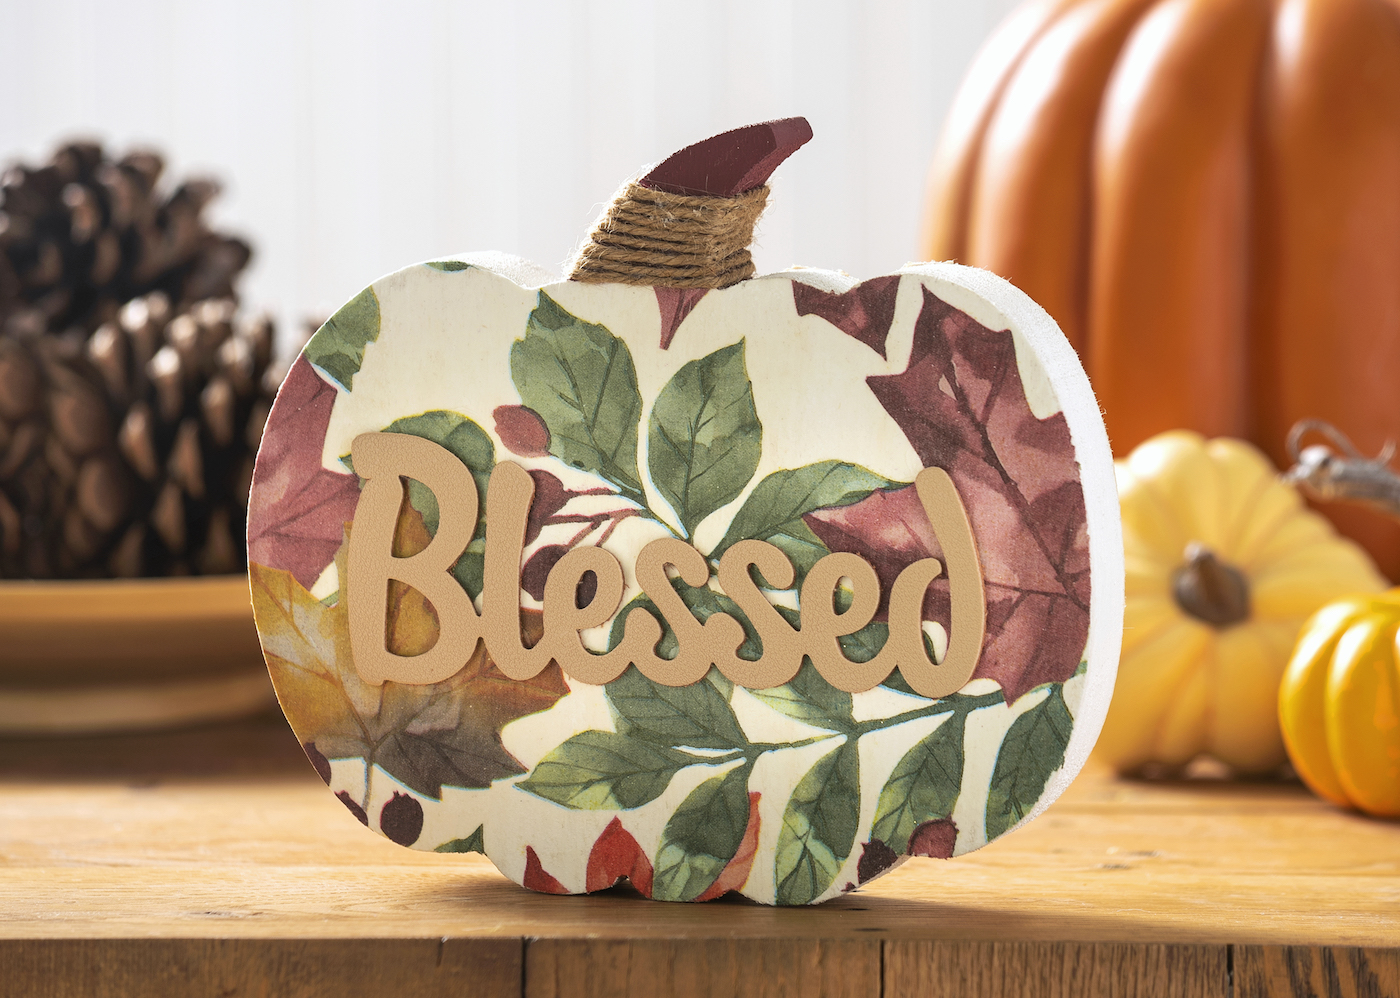 Blessed wood pumpkin decor for Thanksgiving